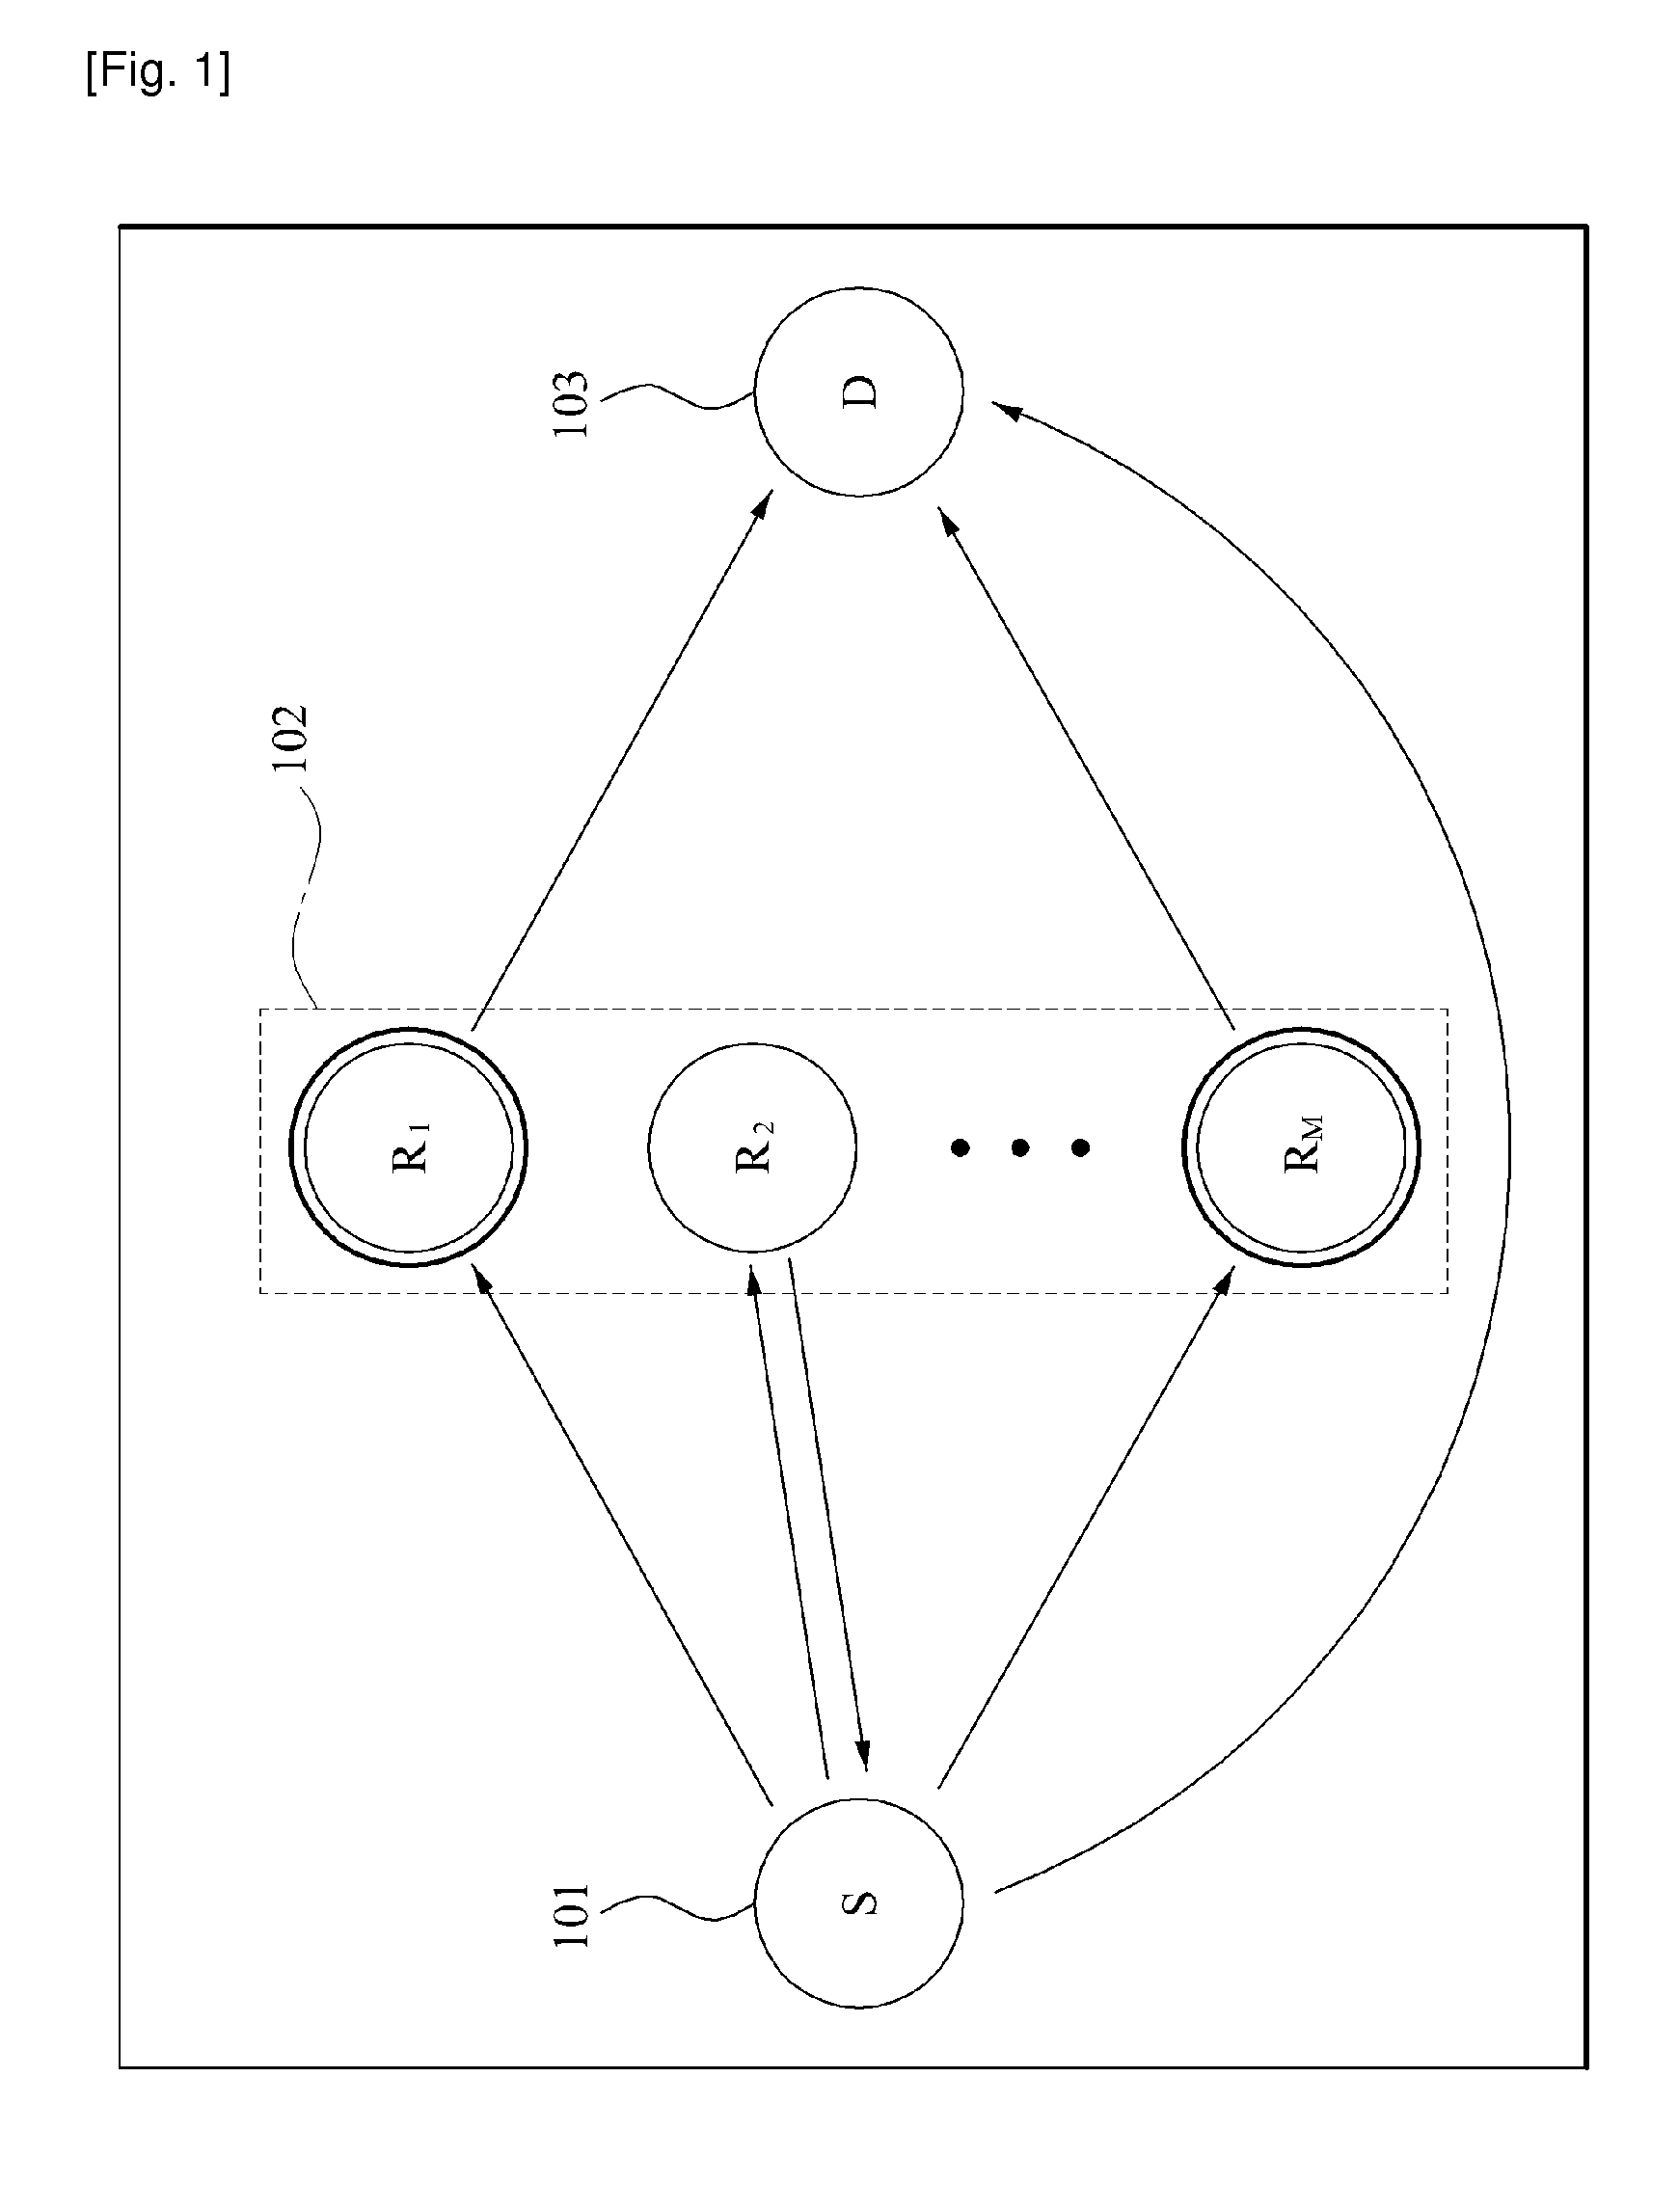 Wireless communication system and method for performing cooperative diversity using cyclic delay